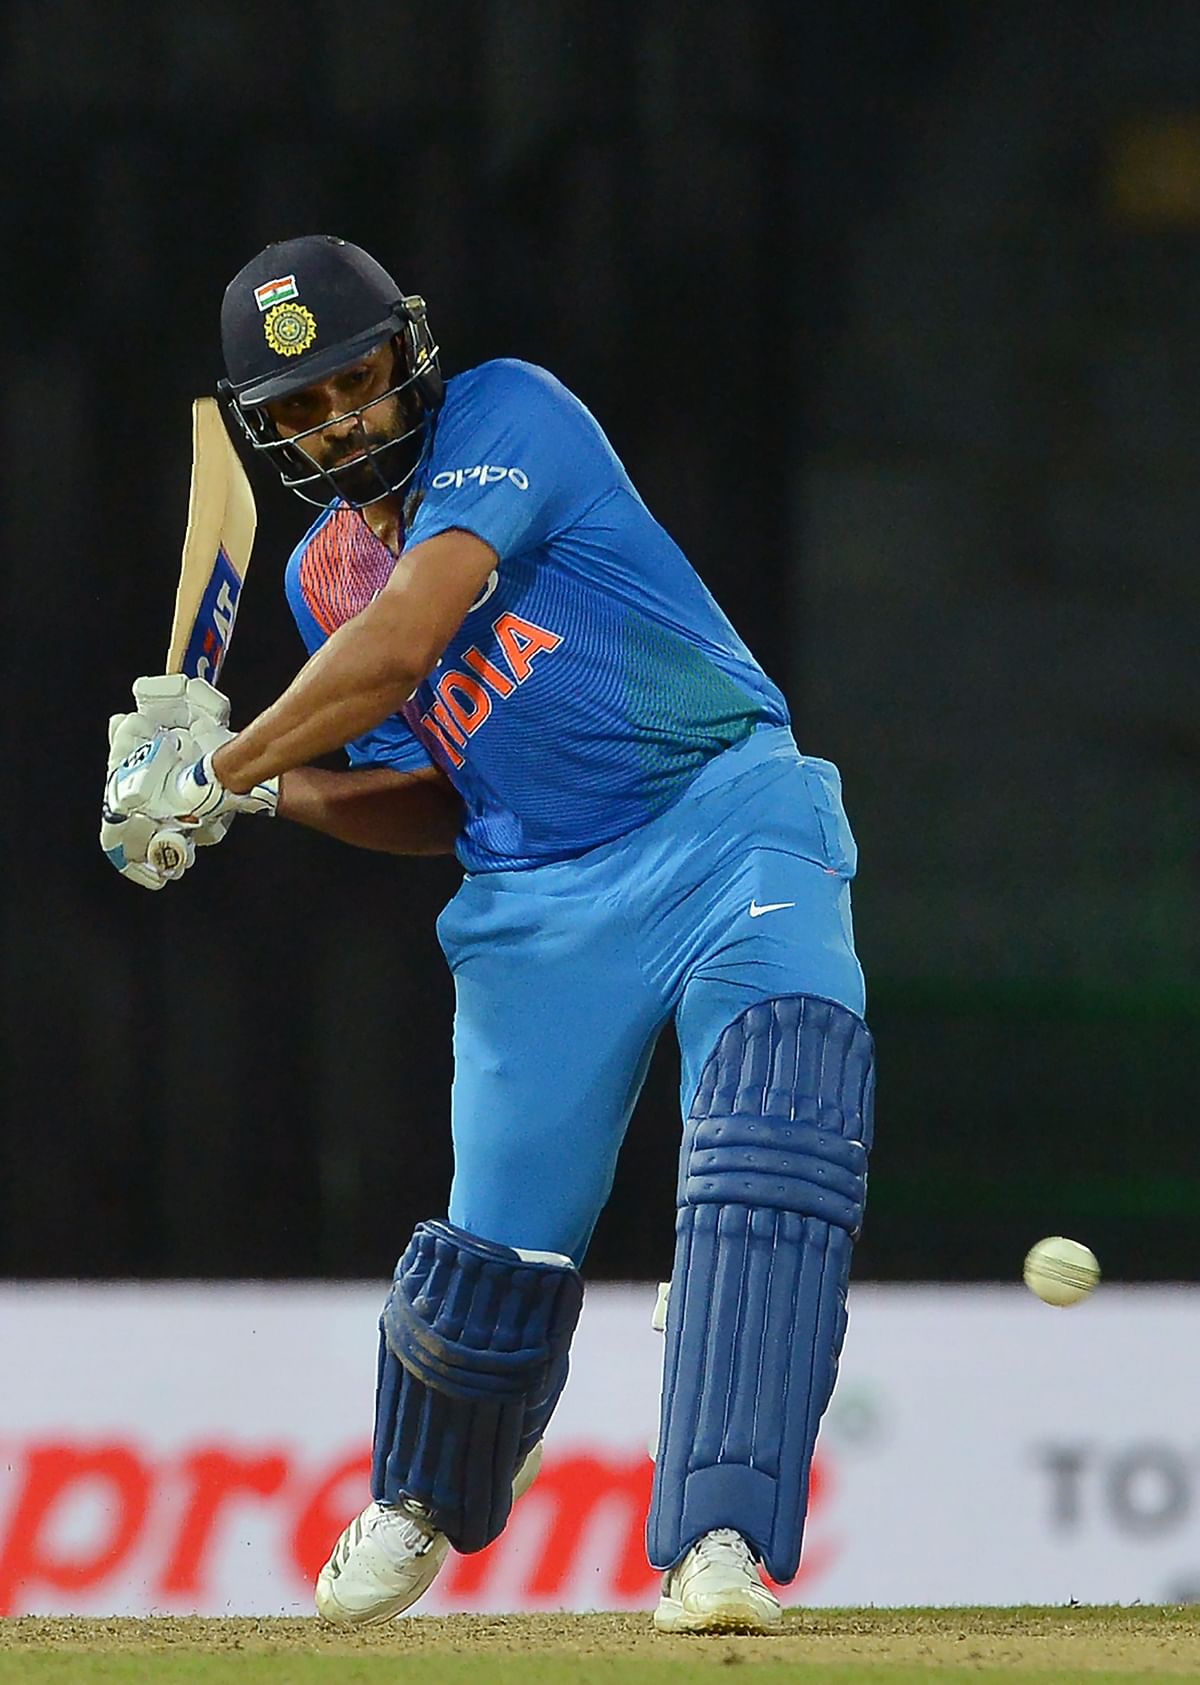 Rohit hit 89 off 61 balls to lead India to 176 for 3. AFP